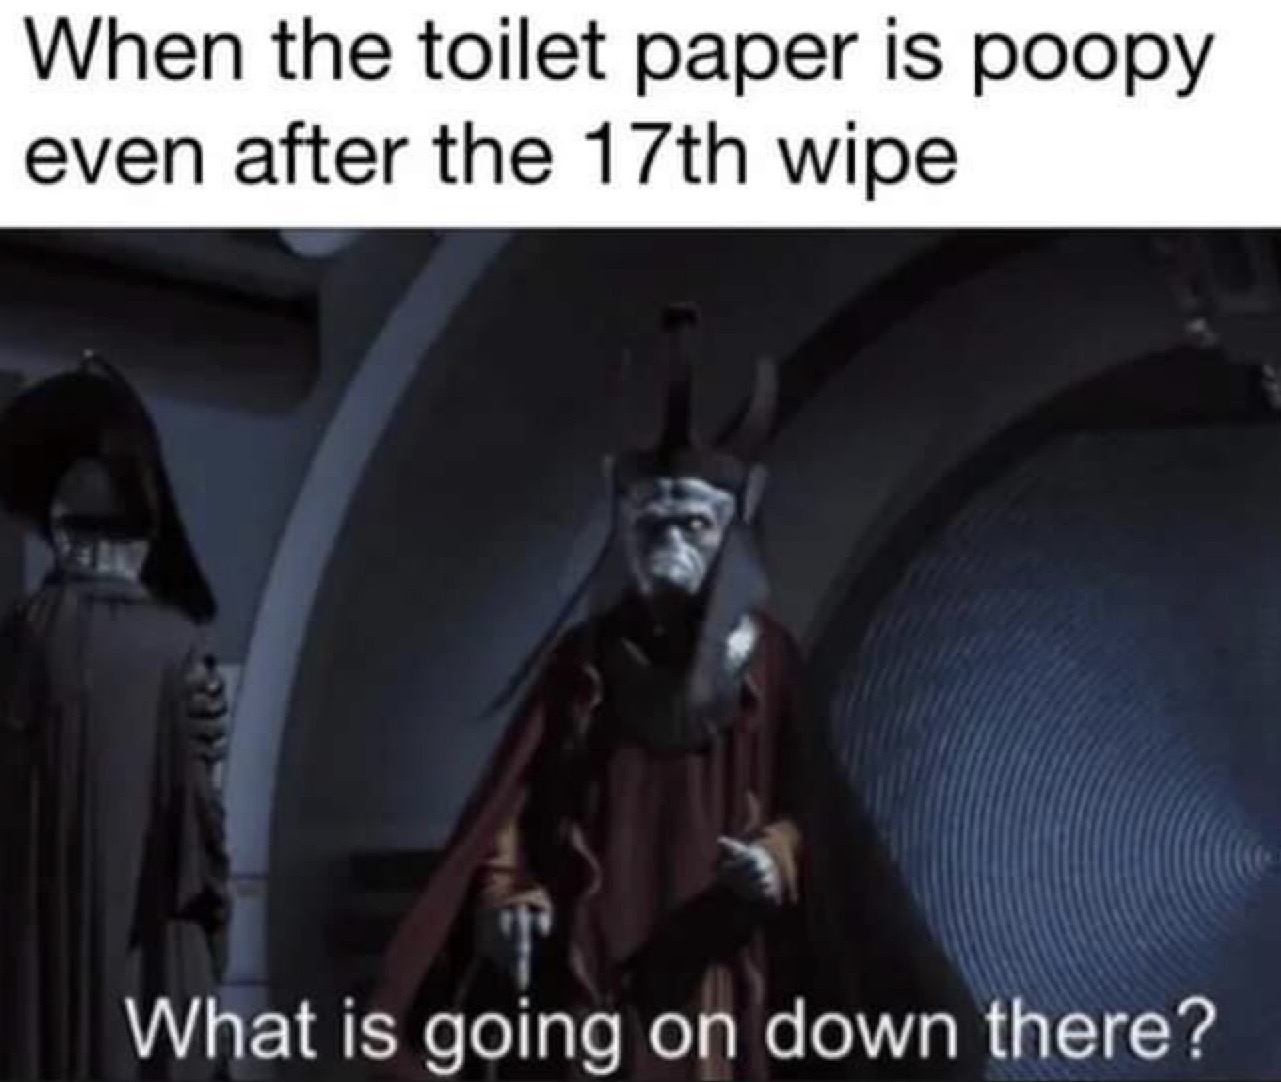 photo caption - When the toilet paper is poopy even after the 17th wipe What is going on down there?